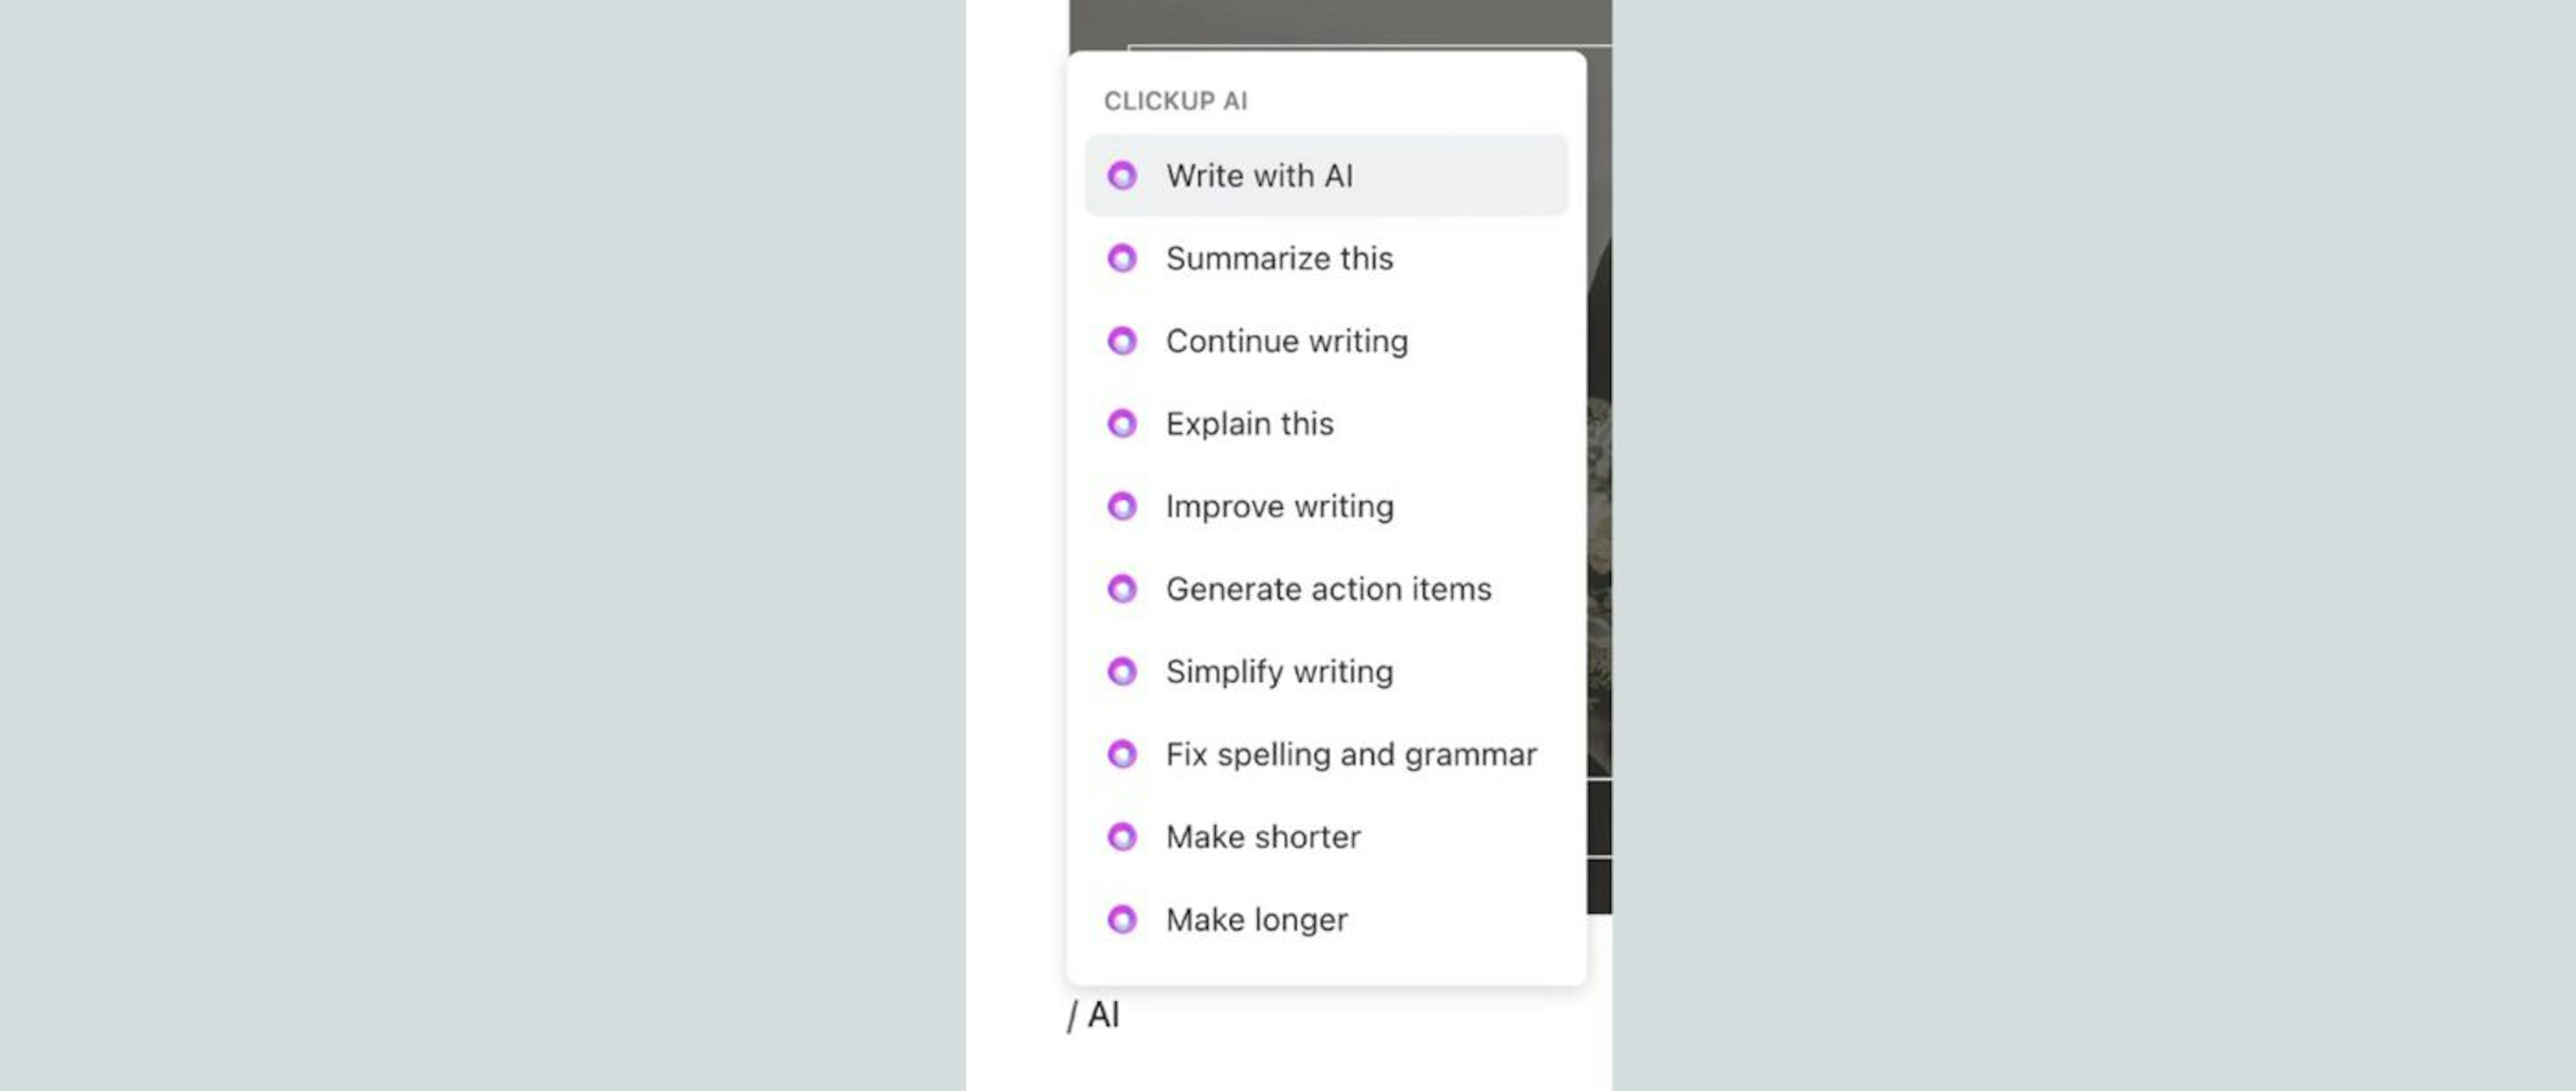 ClickUp triggers its AI assistant when inputting AI in the document and allowing to choose between a set of pre-constructed prompts